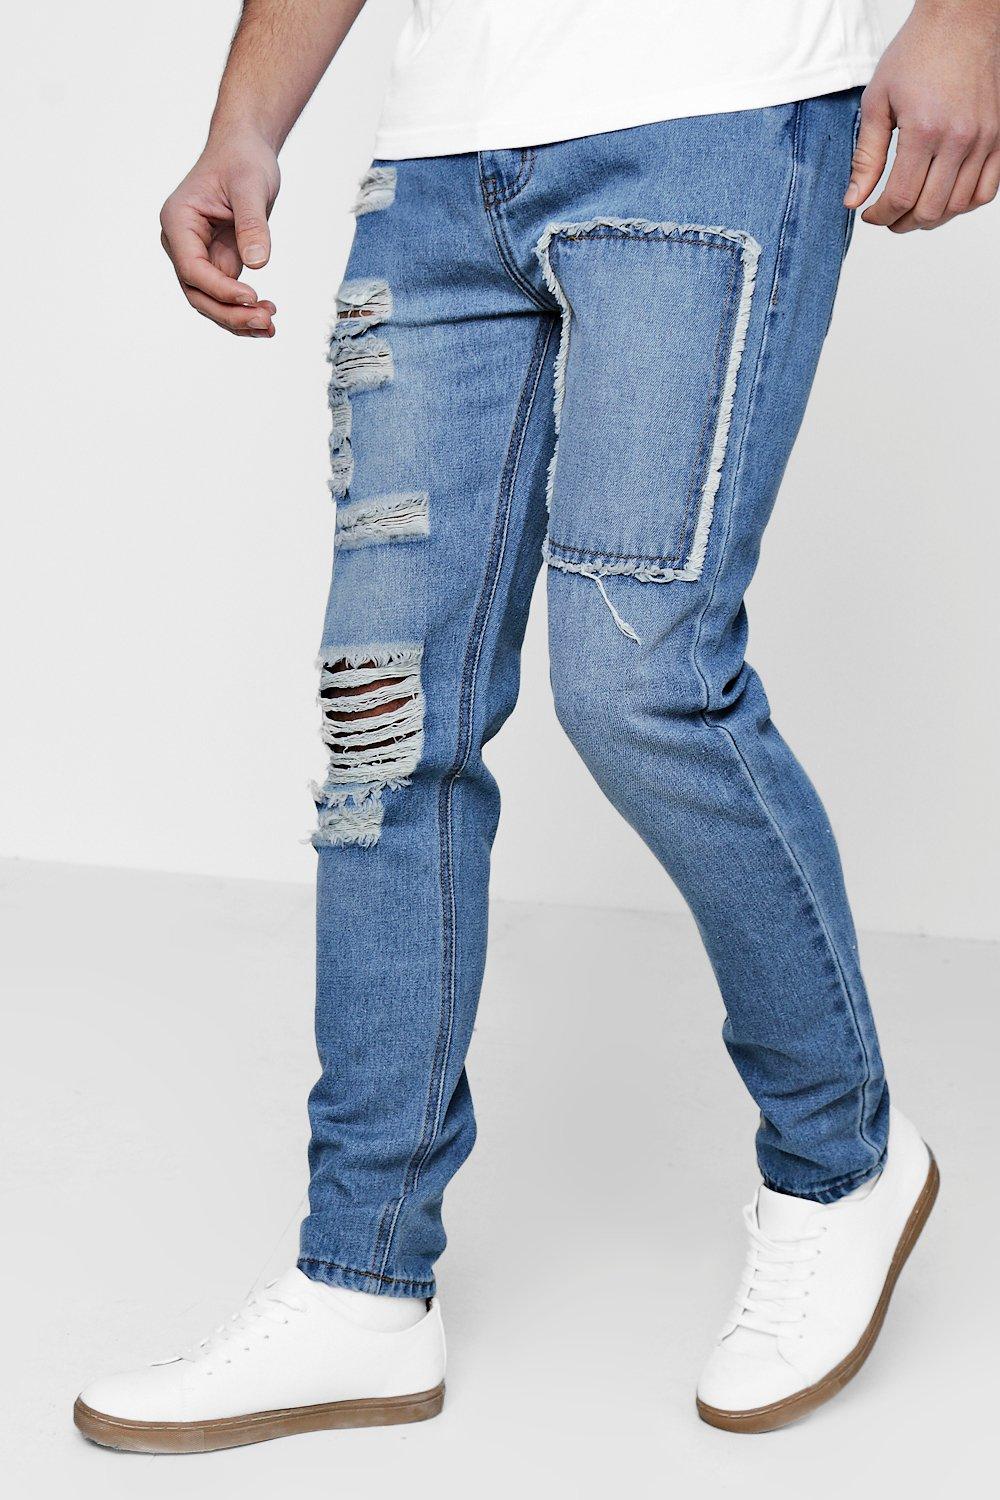 525 perfect waist jeans